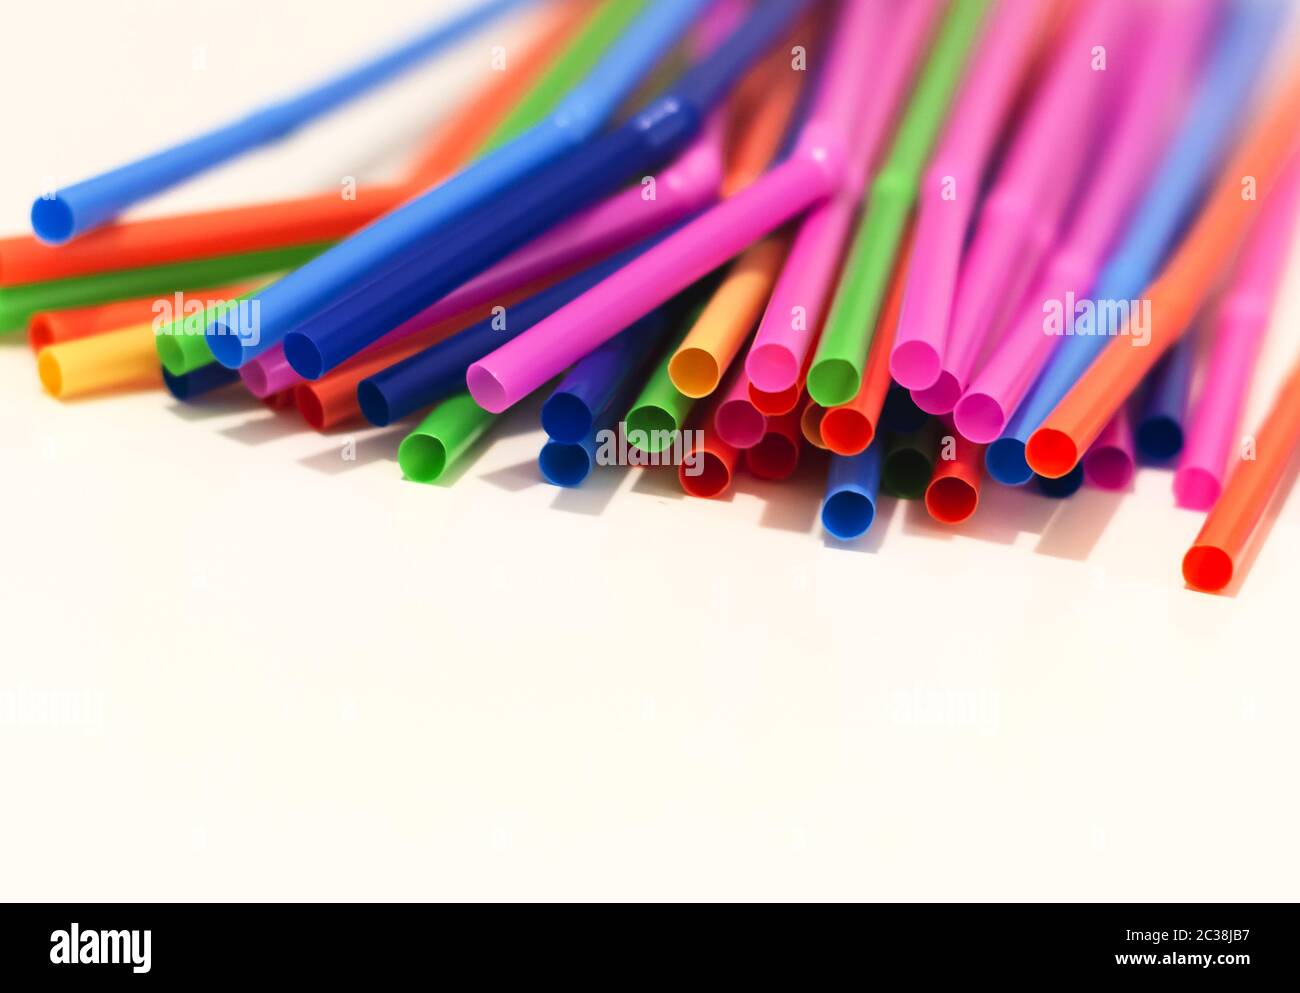 a group of colored plastic cocktail straws. Plastic and non-recyclable materials. Stock Photo